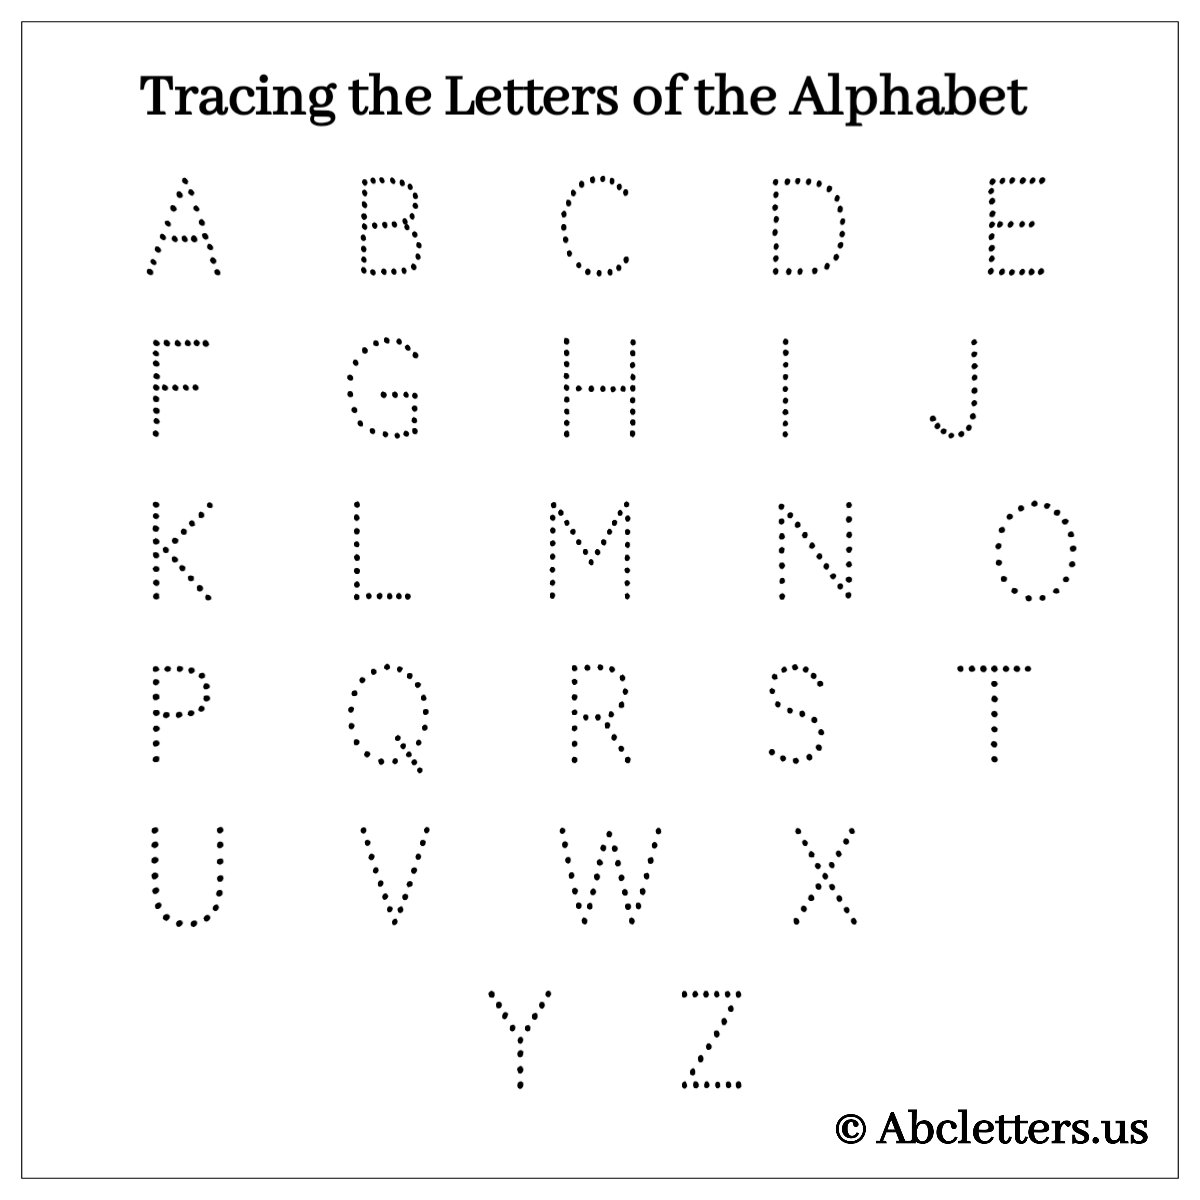 Tracing the Letters of the Alphabet